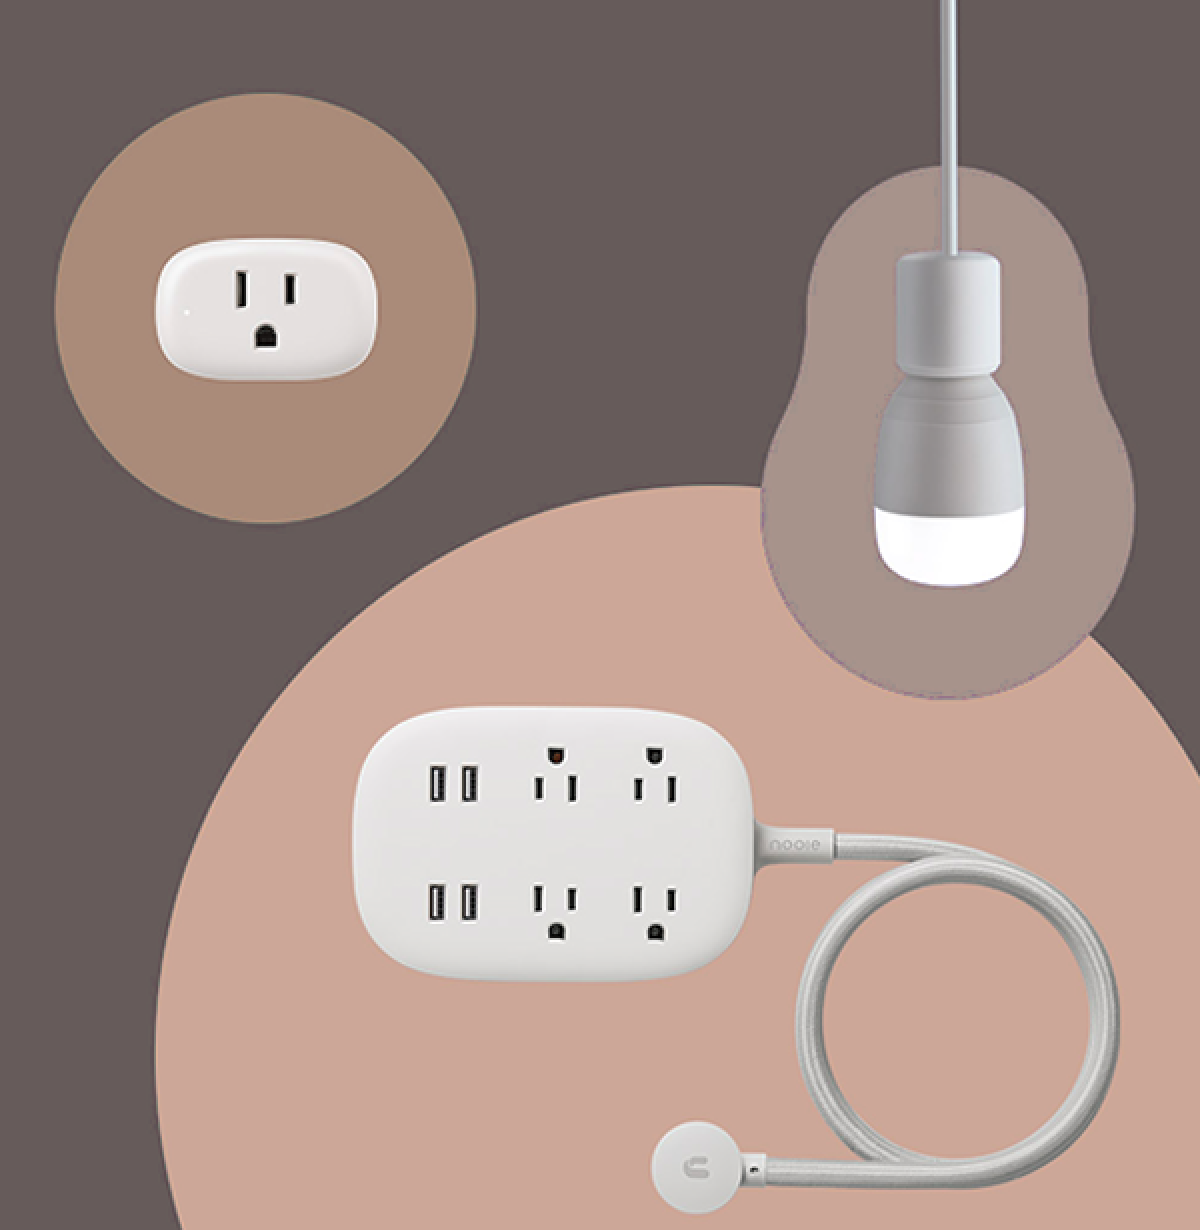 In Focus: How to get the most out of your Nooie Home Devices